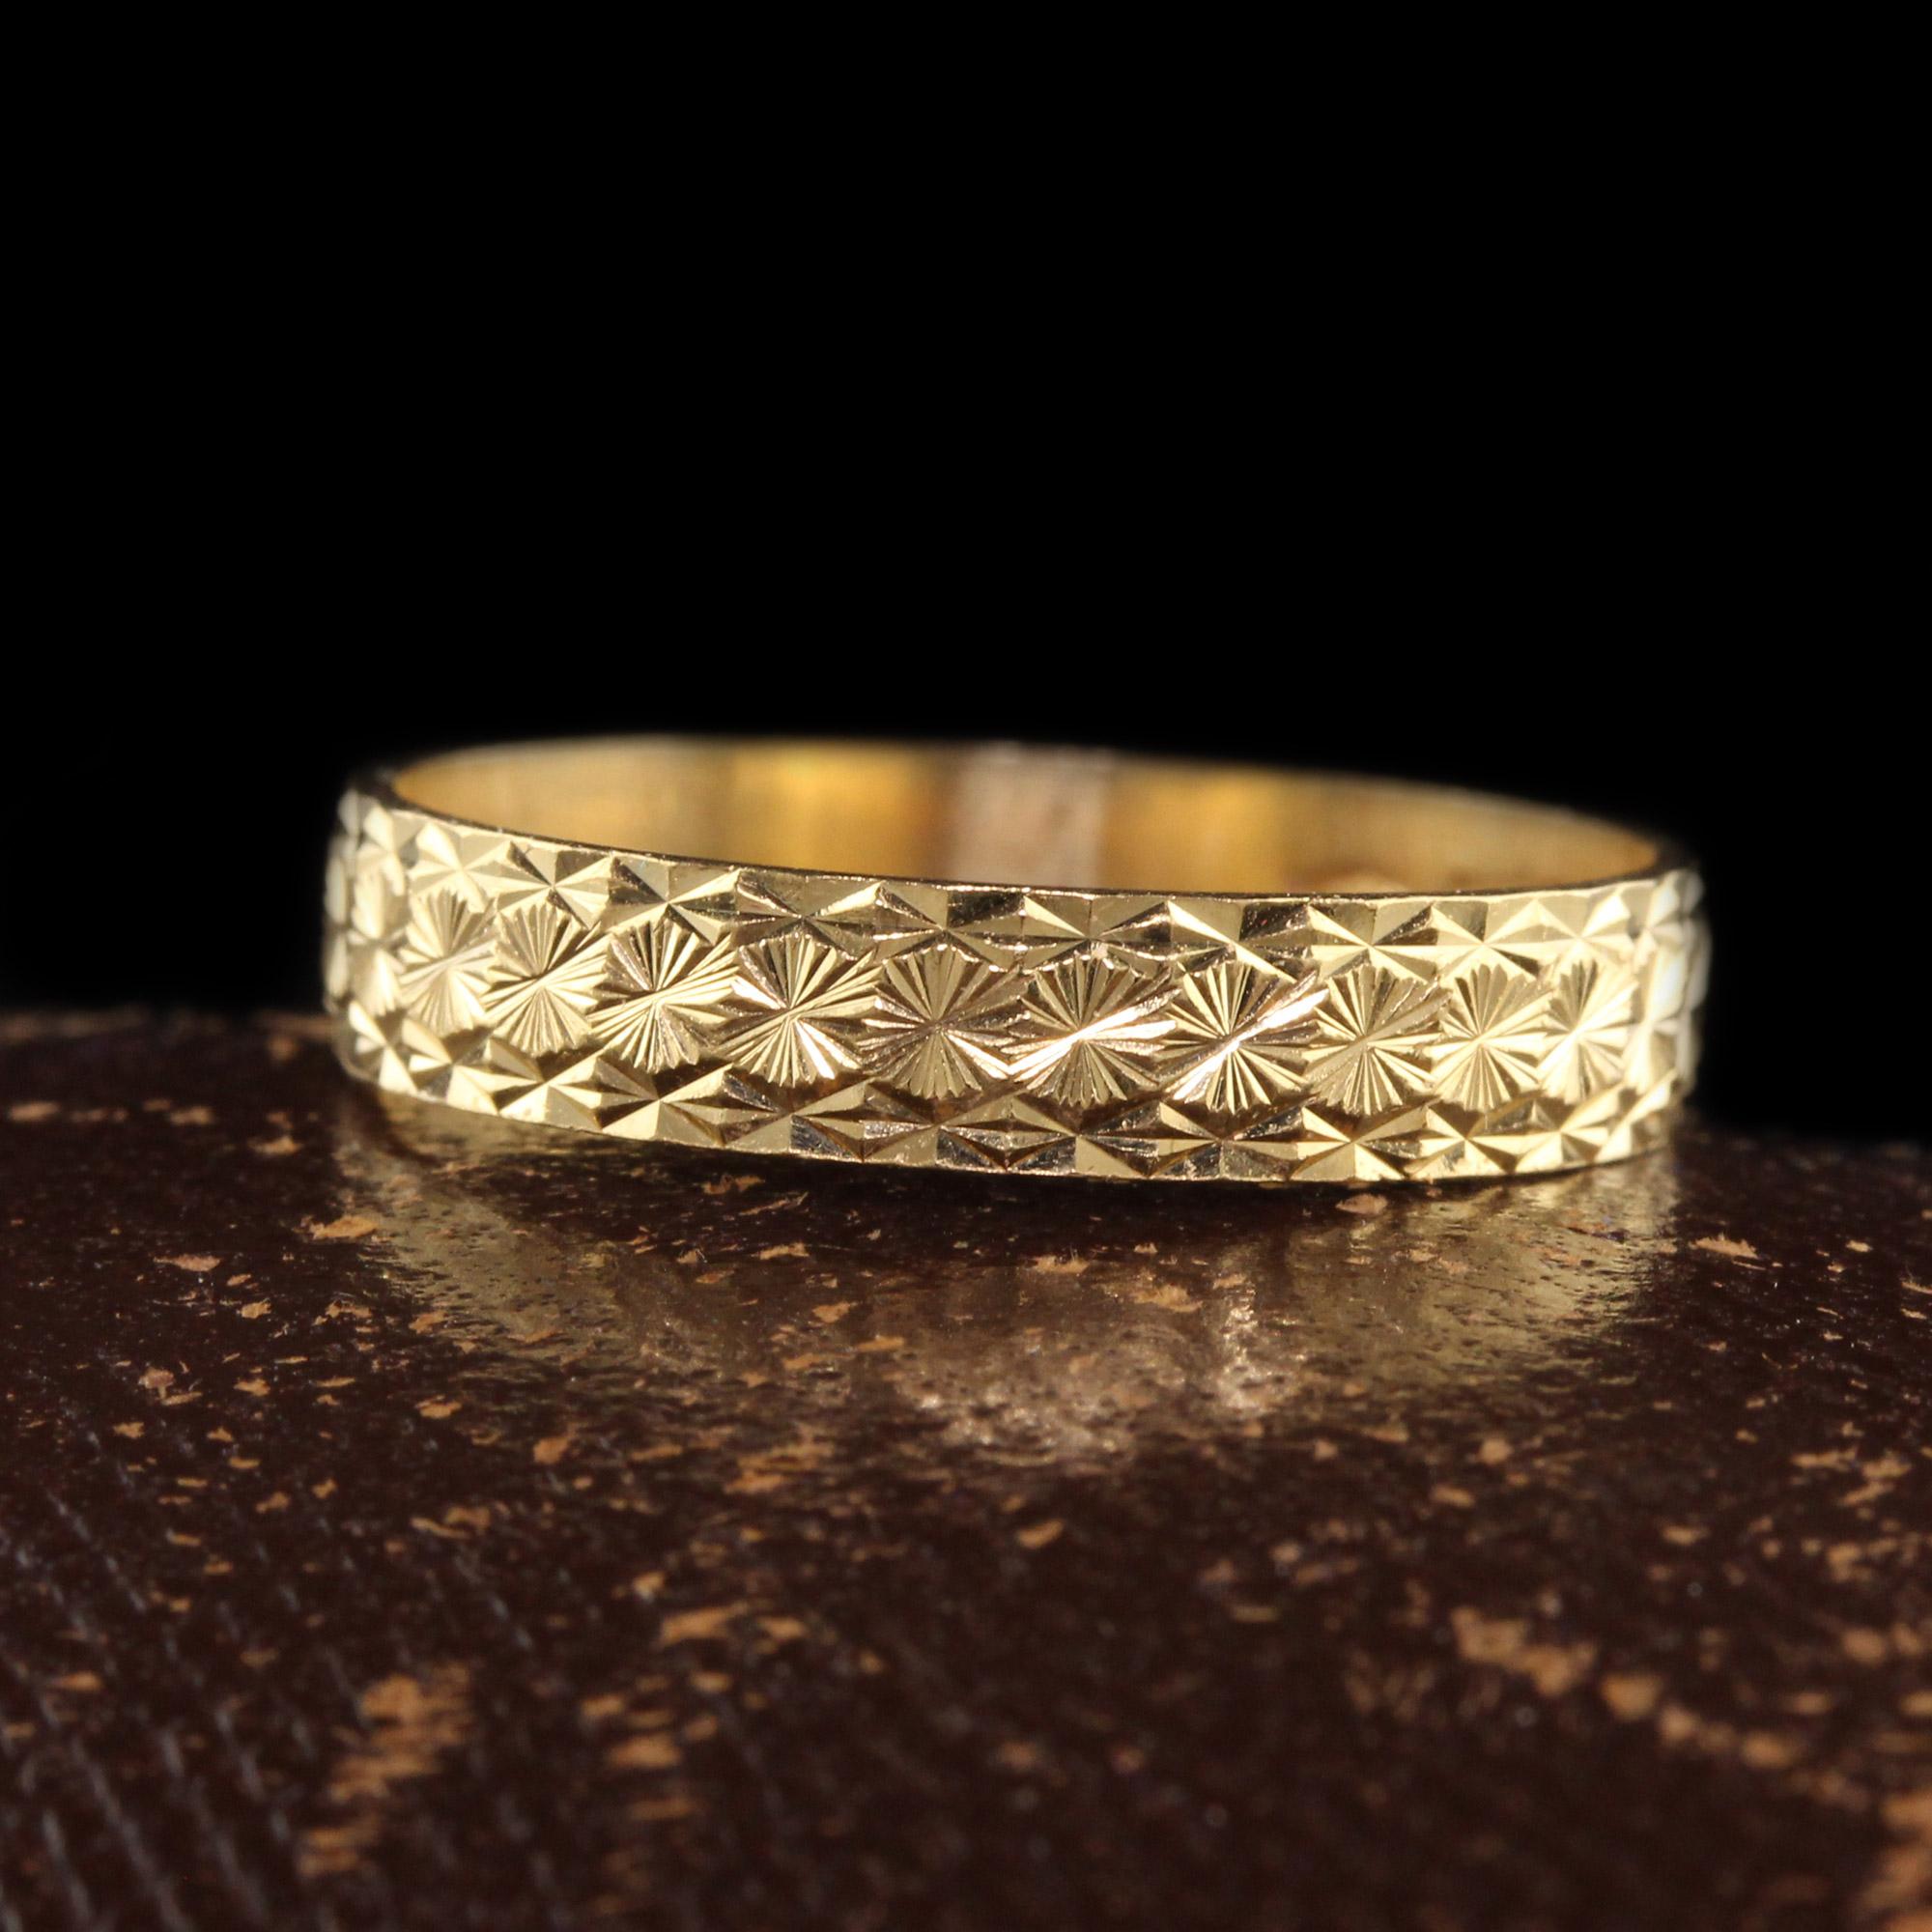 Beautiful Estate Vintage 18K Yellow Gold Engraved Wedding Band. This gorgeous band has engravings that look like diamonds on the entire band. It is in great condition and wears very comfortably.

Item #R1021

Metal: 18K Yellow Gold

Weight: 2.7